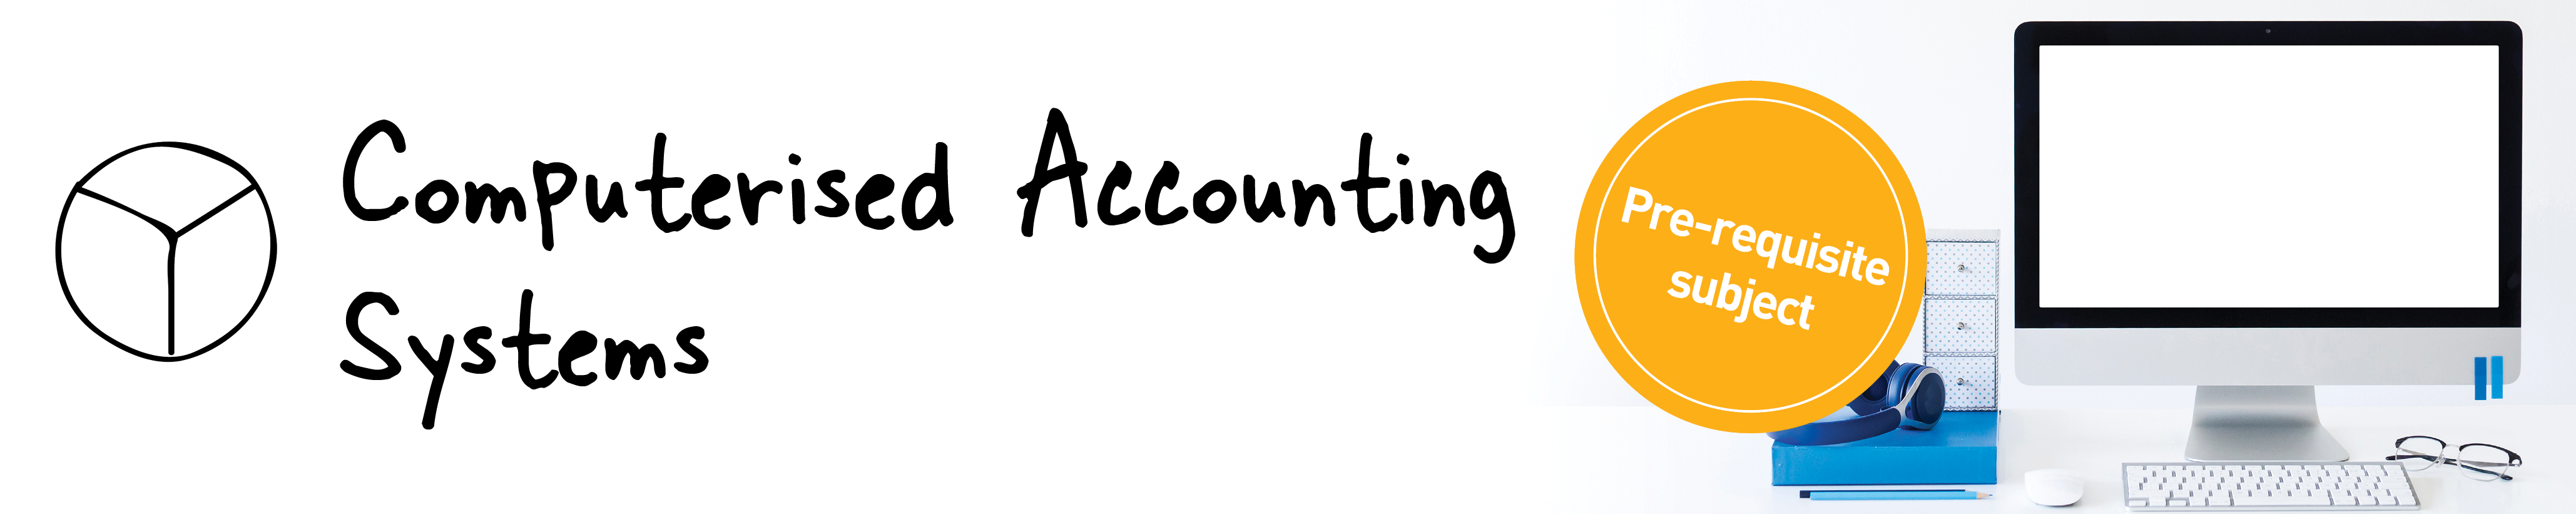 Computerised Accounting Systems